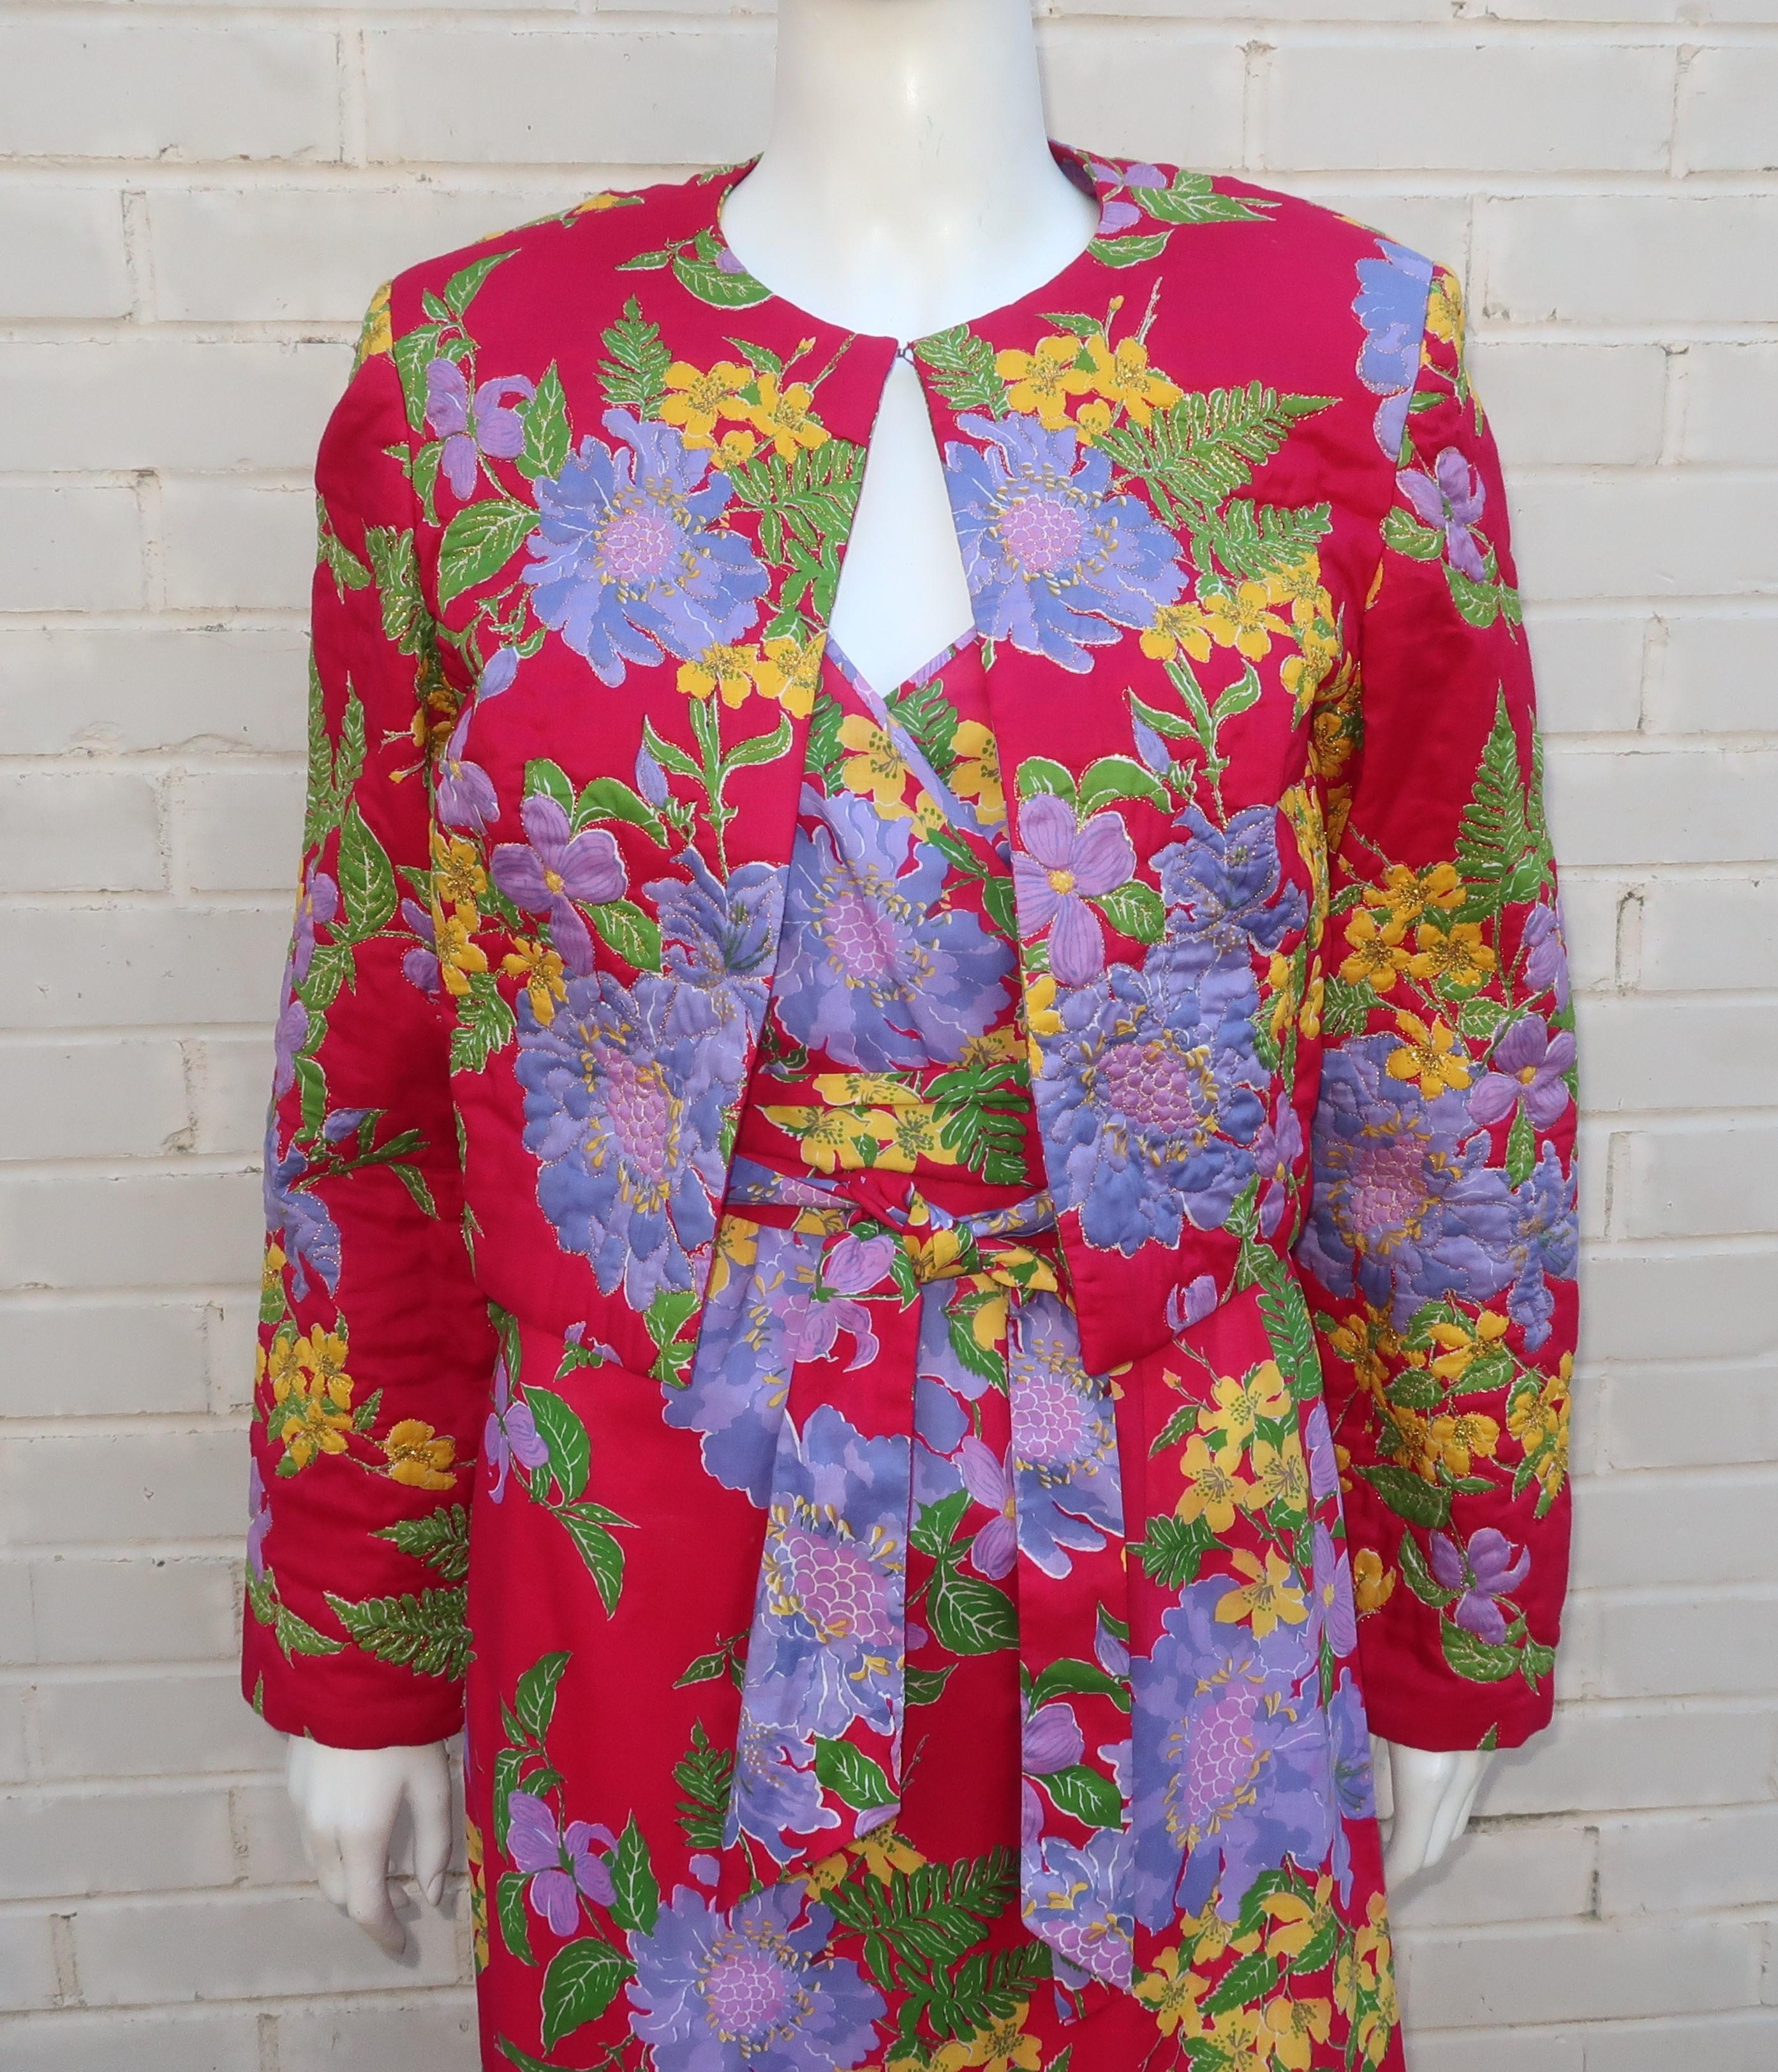 C.1970 cotton sun dress with a coordinating quilted bolero jacket and tie belt by Thai Lines of Bangkok.  Both pieces are in a tropical hand screened floral print in vibrant shades of magenta, purple, yellow and green.  The dress zips and hooks at